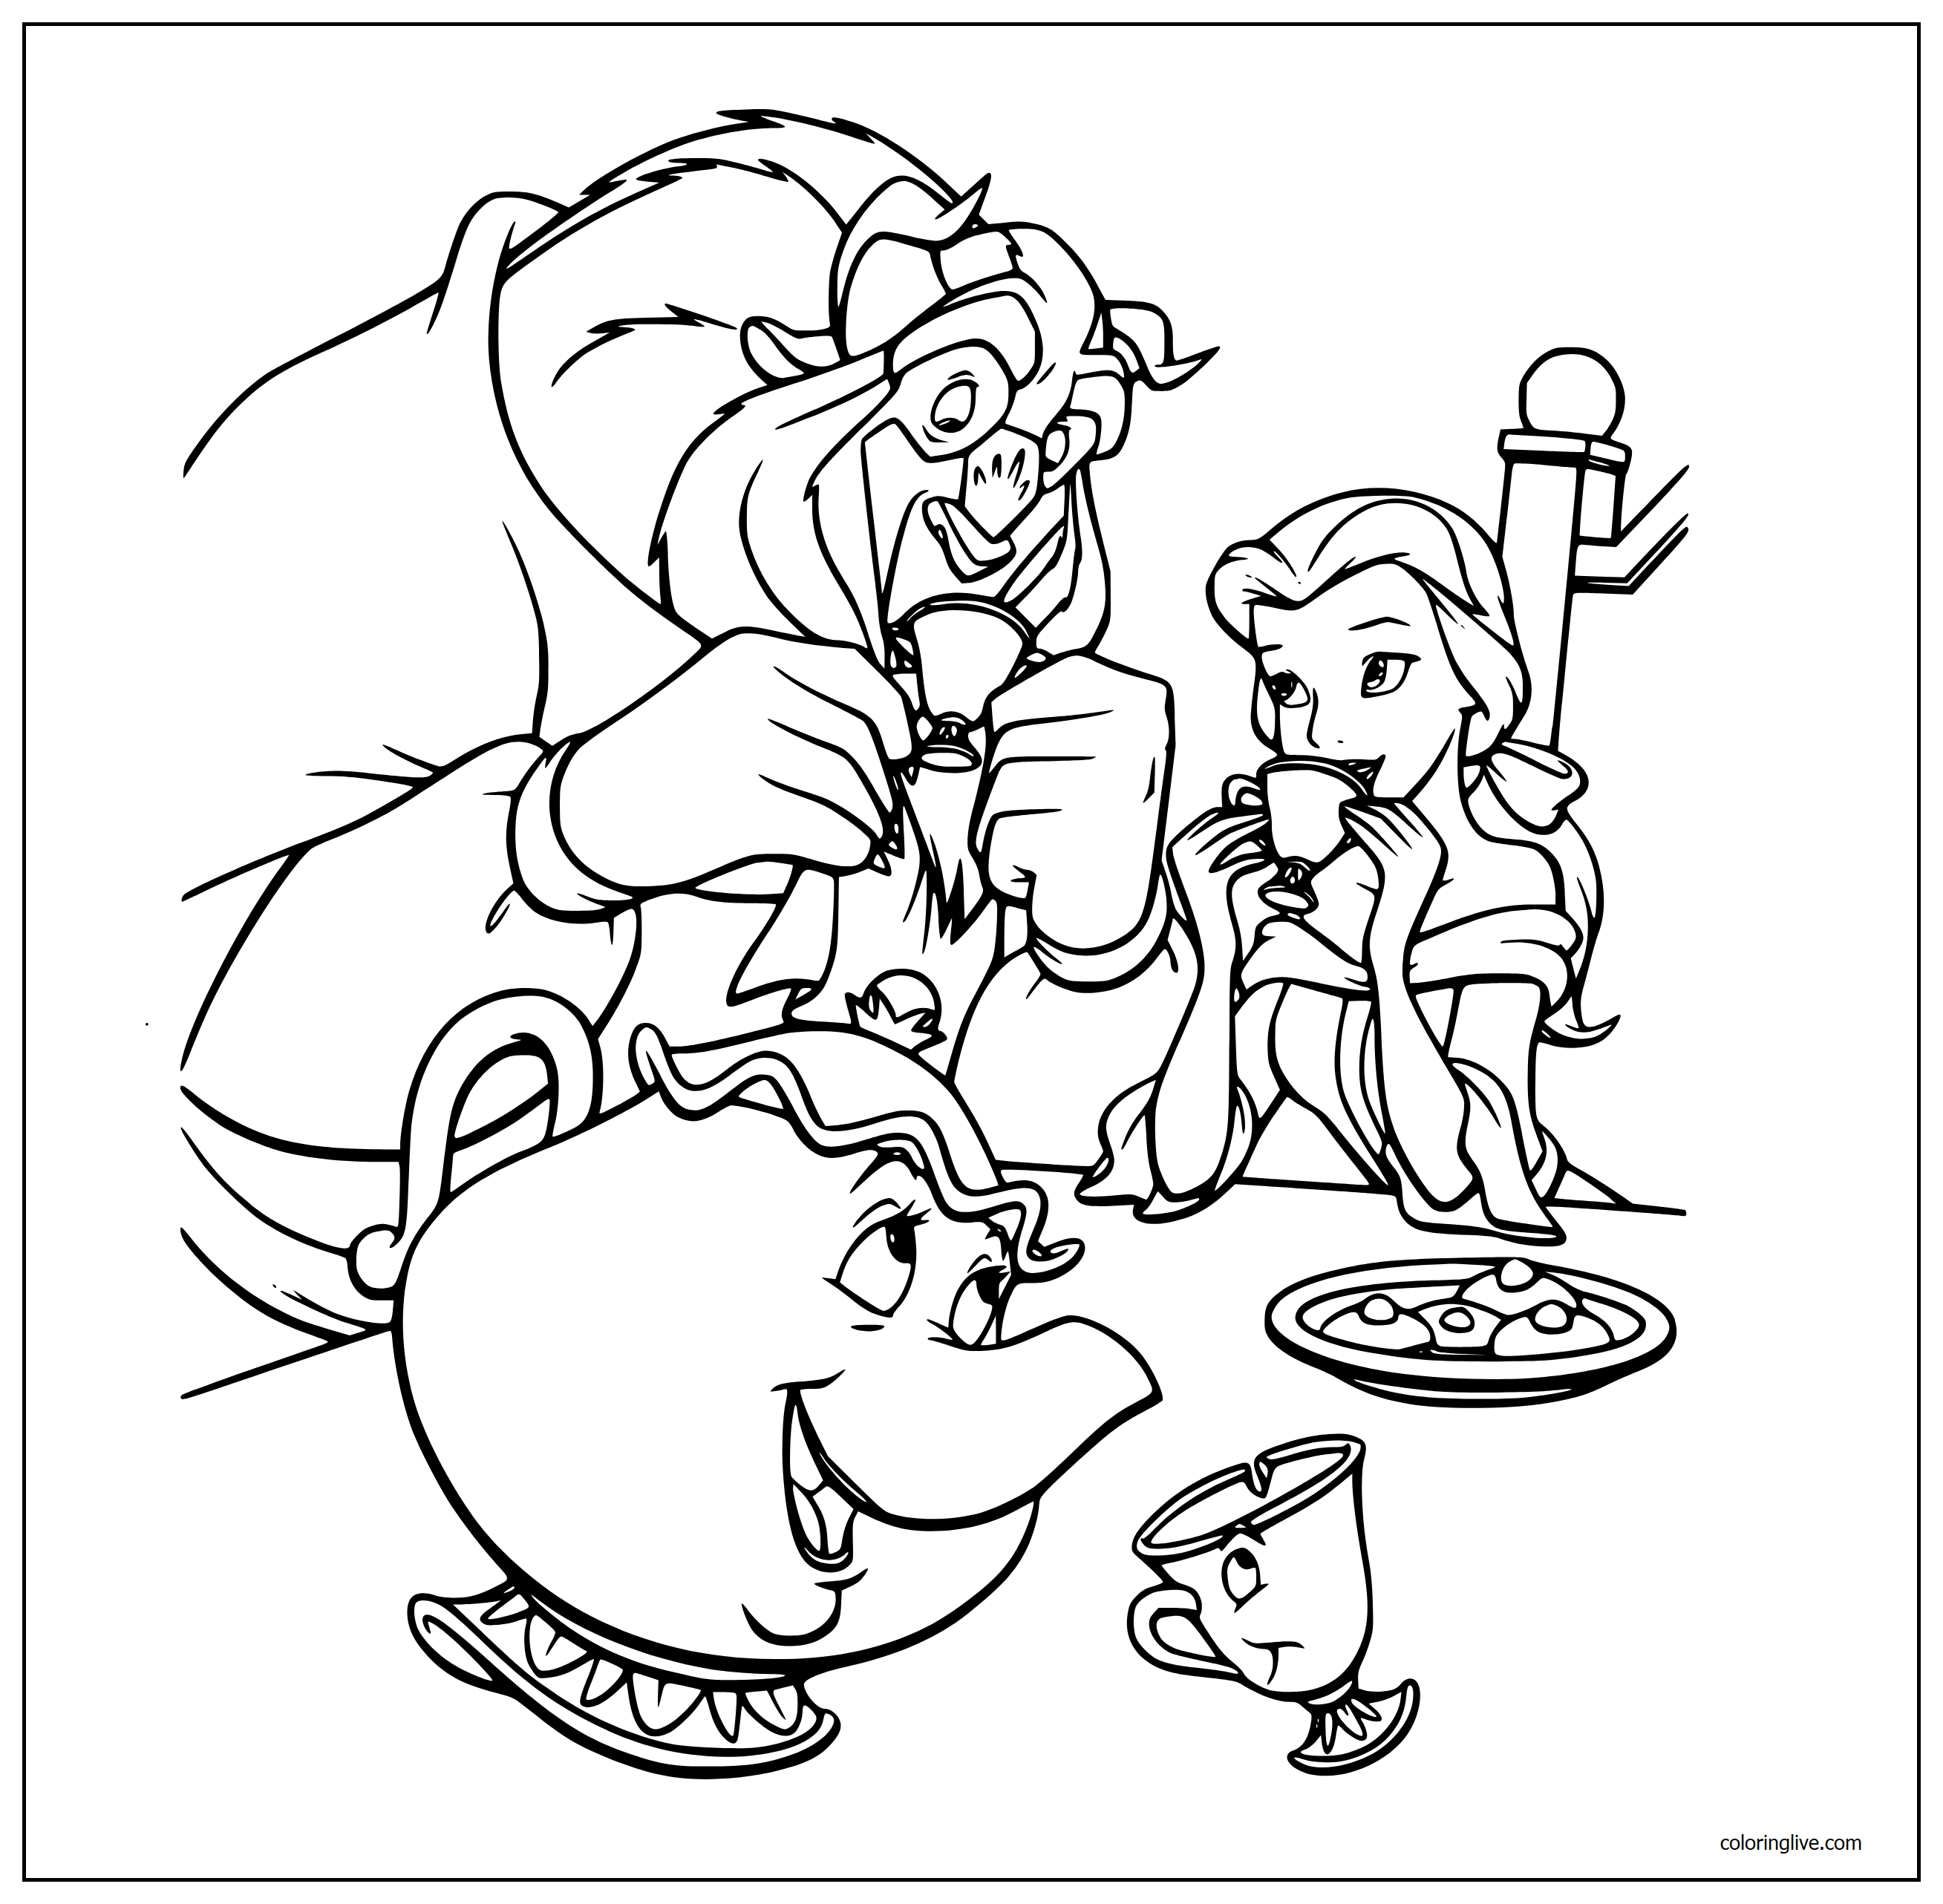 Printable Beauty and the Beast   7 Coloring Page for kids.